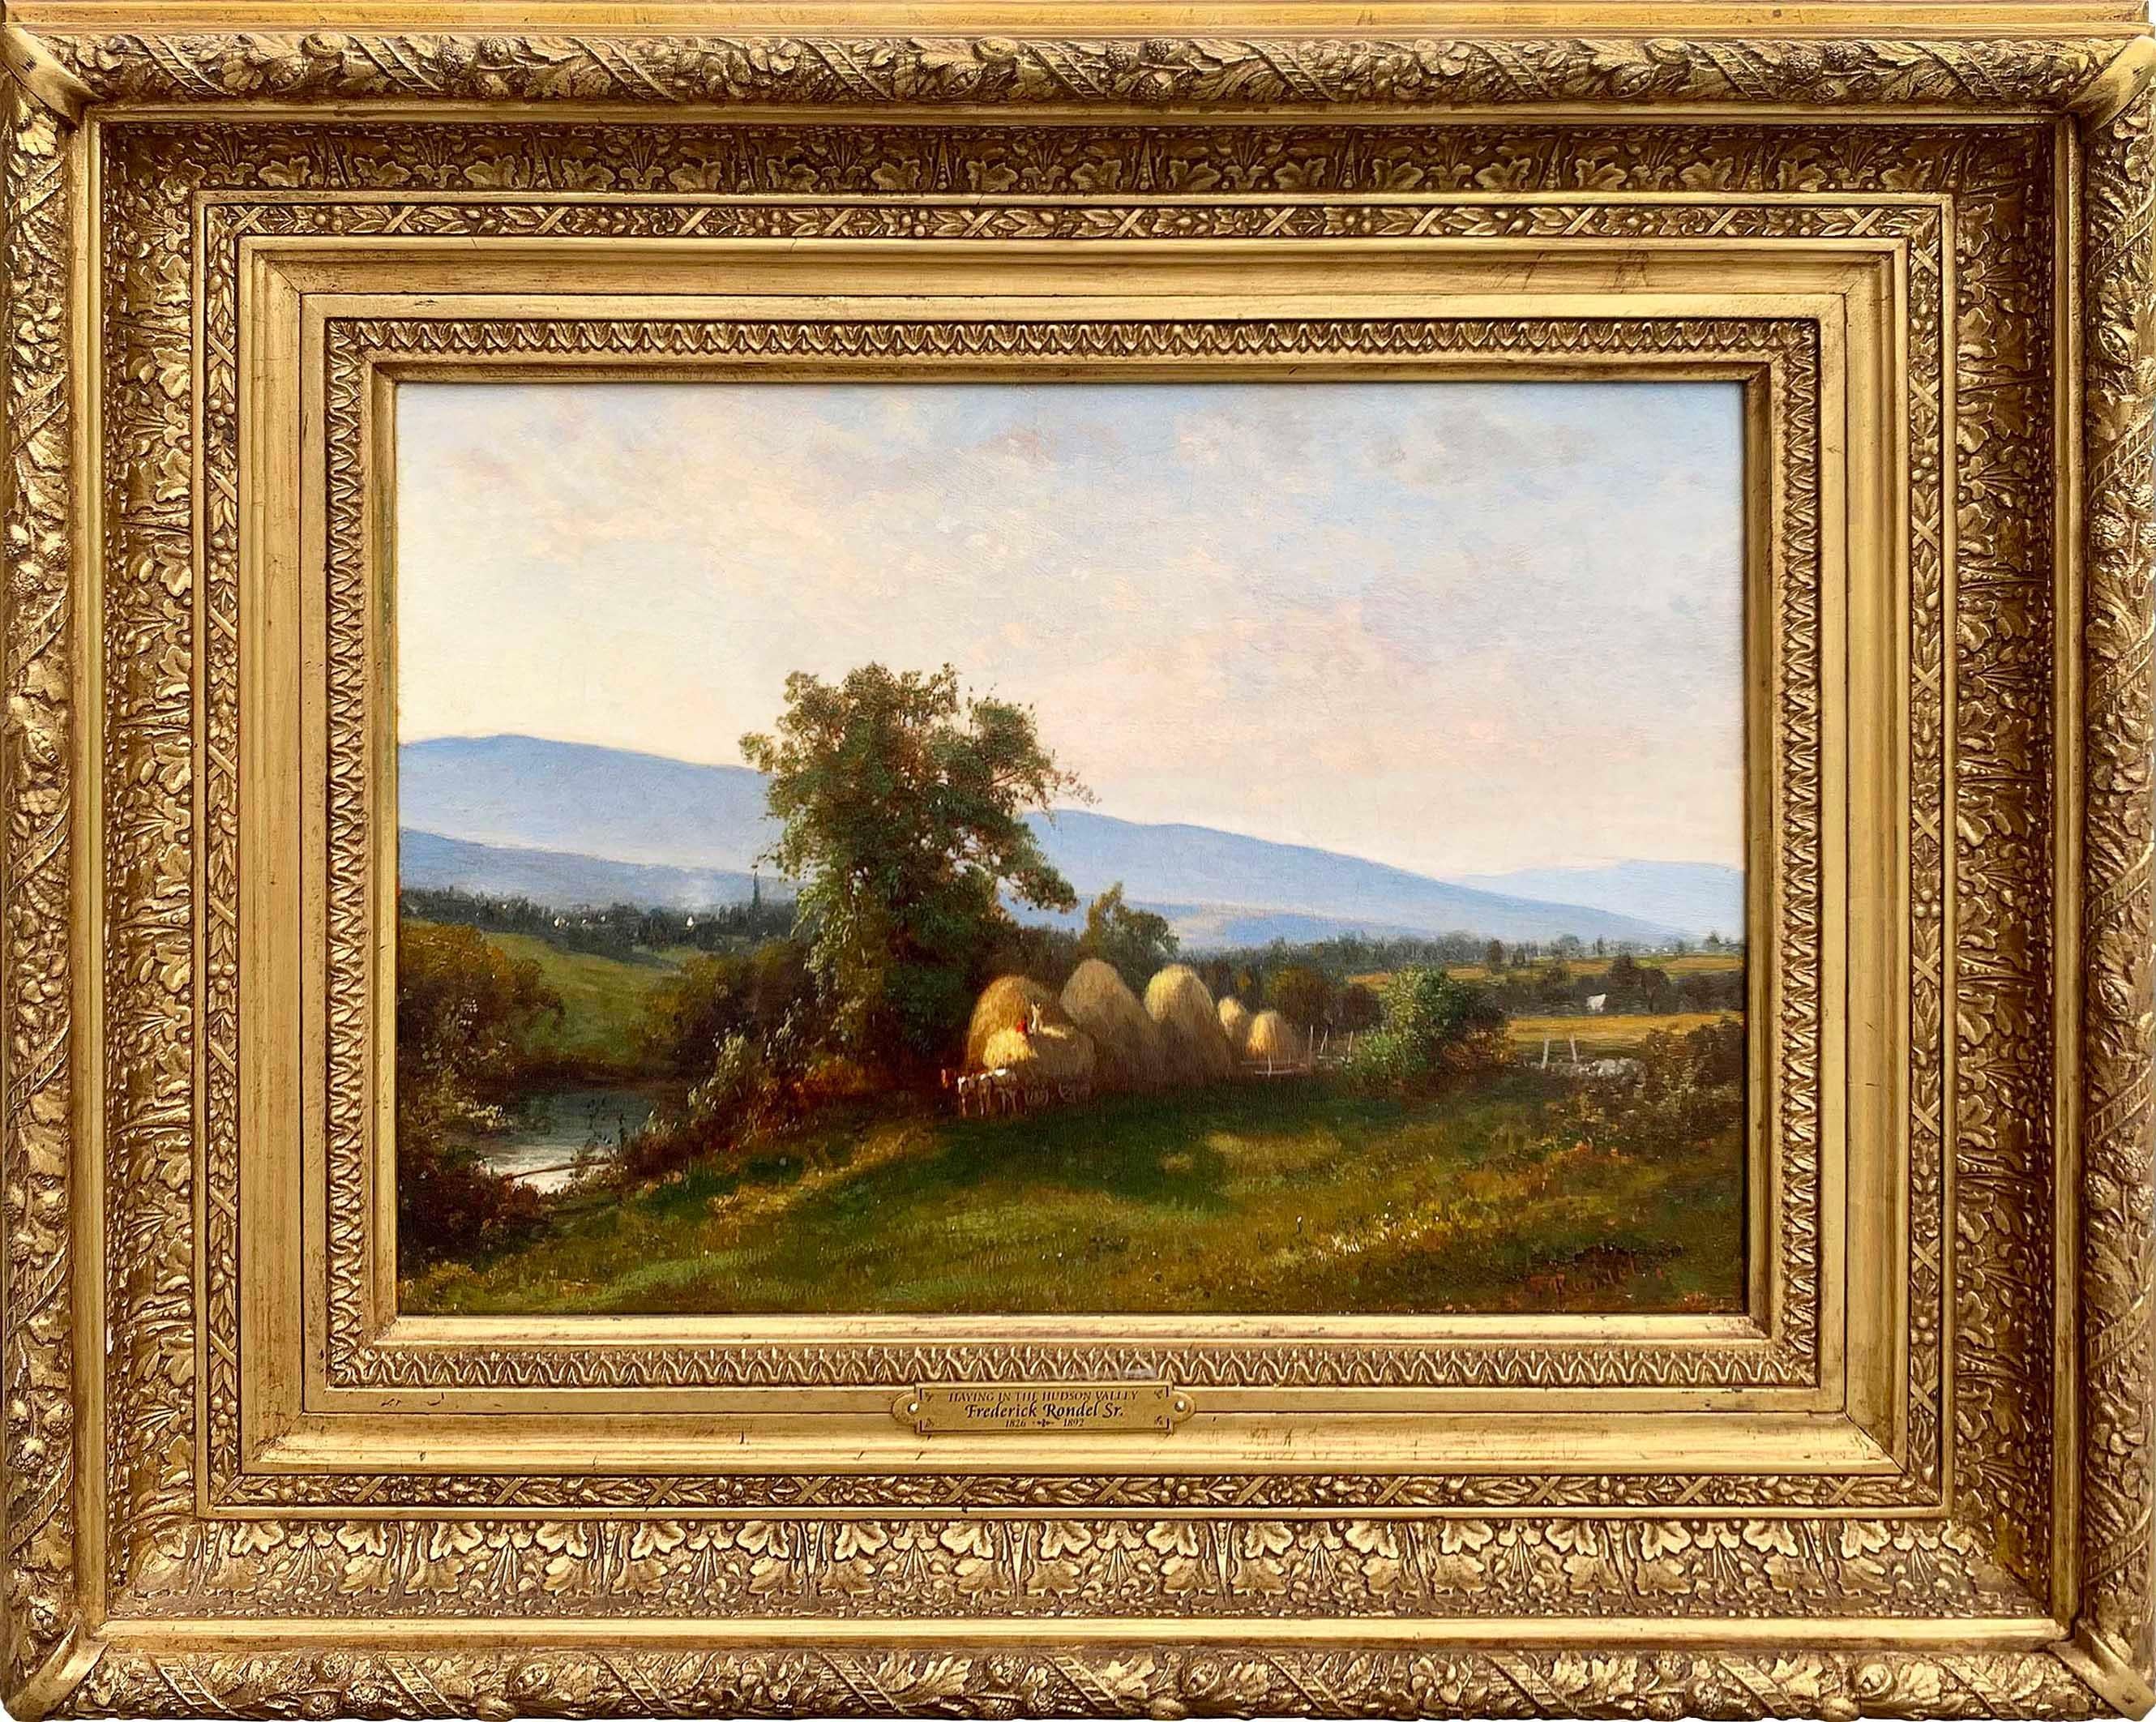 Haying in the Hudson River Valley by Frederick Rondel, Sr. (American, 1826-1892)